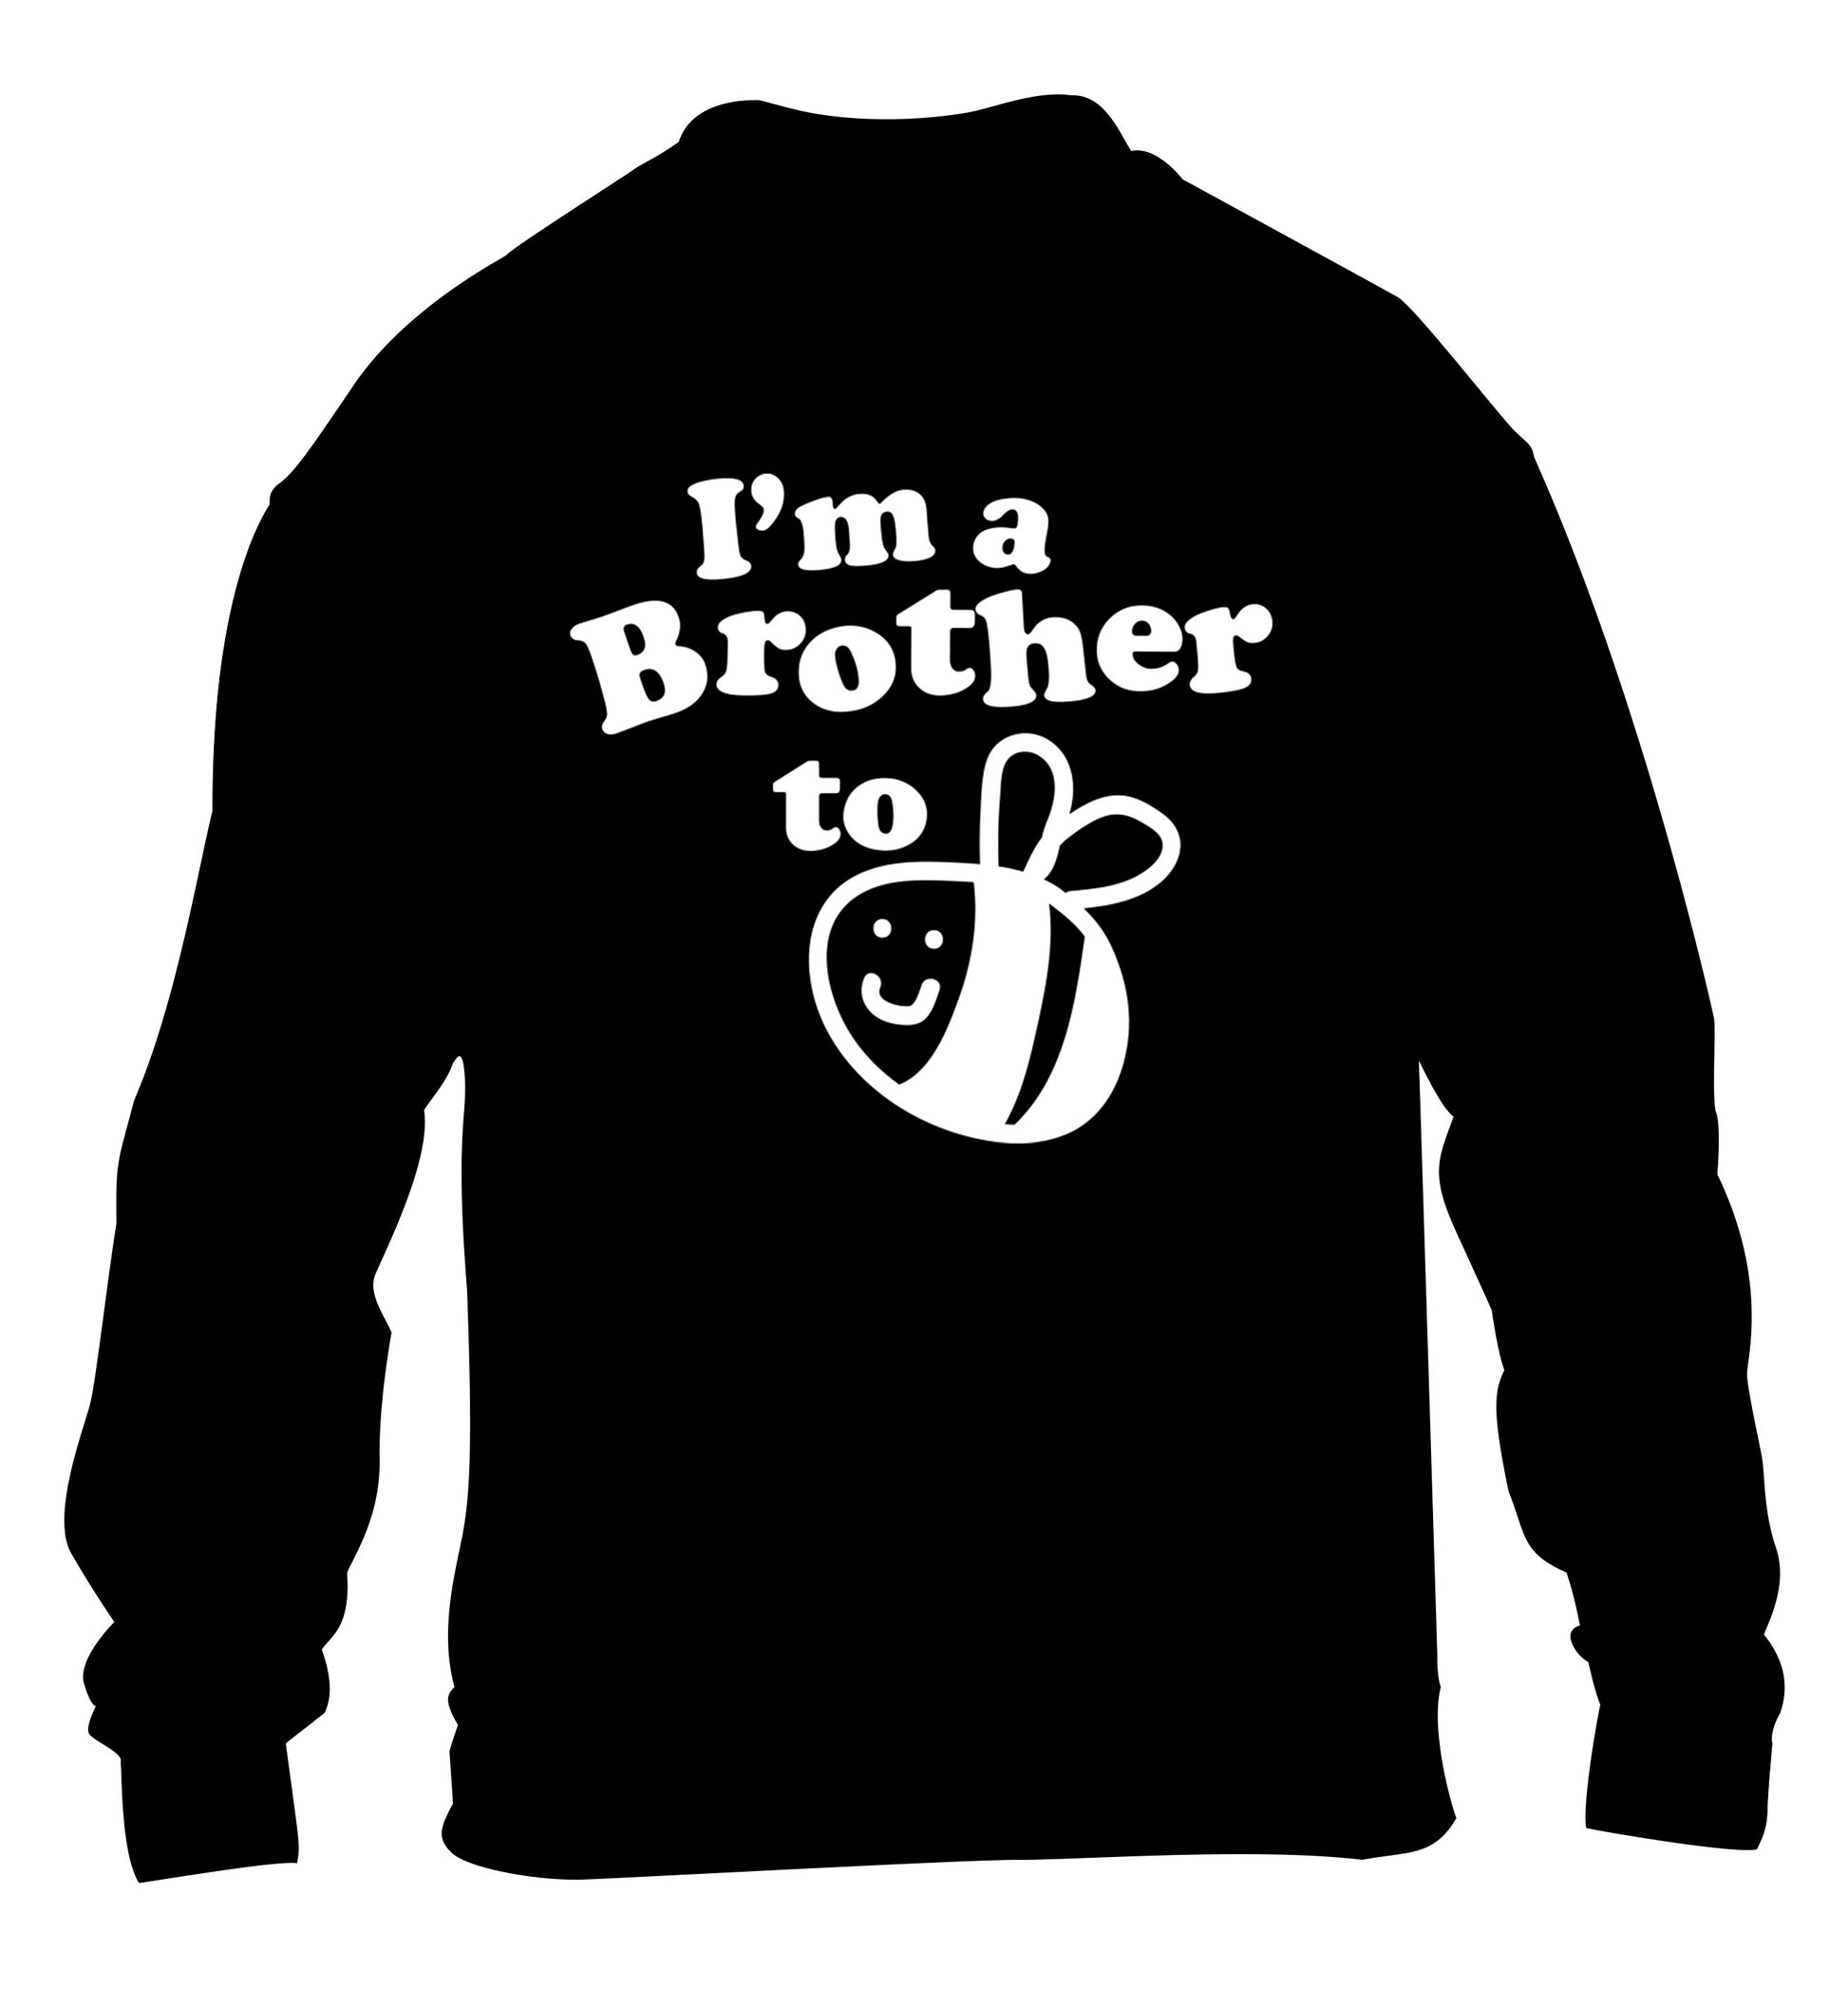 I'm a brother to be children's black sweater 12-14 Years